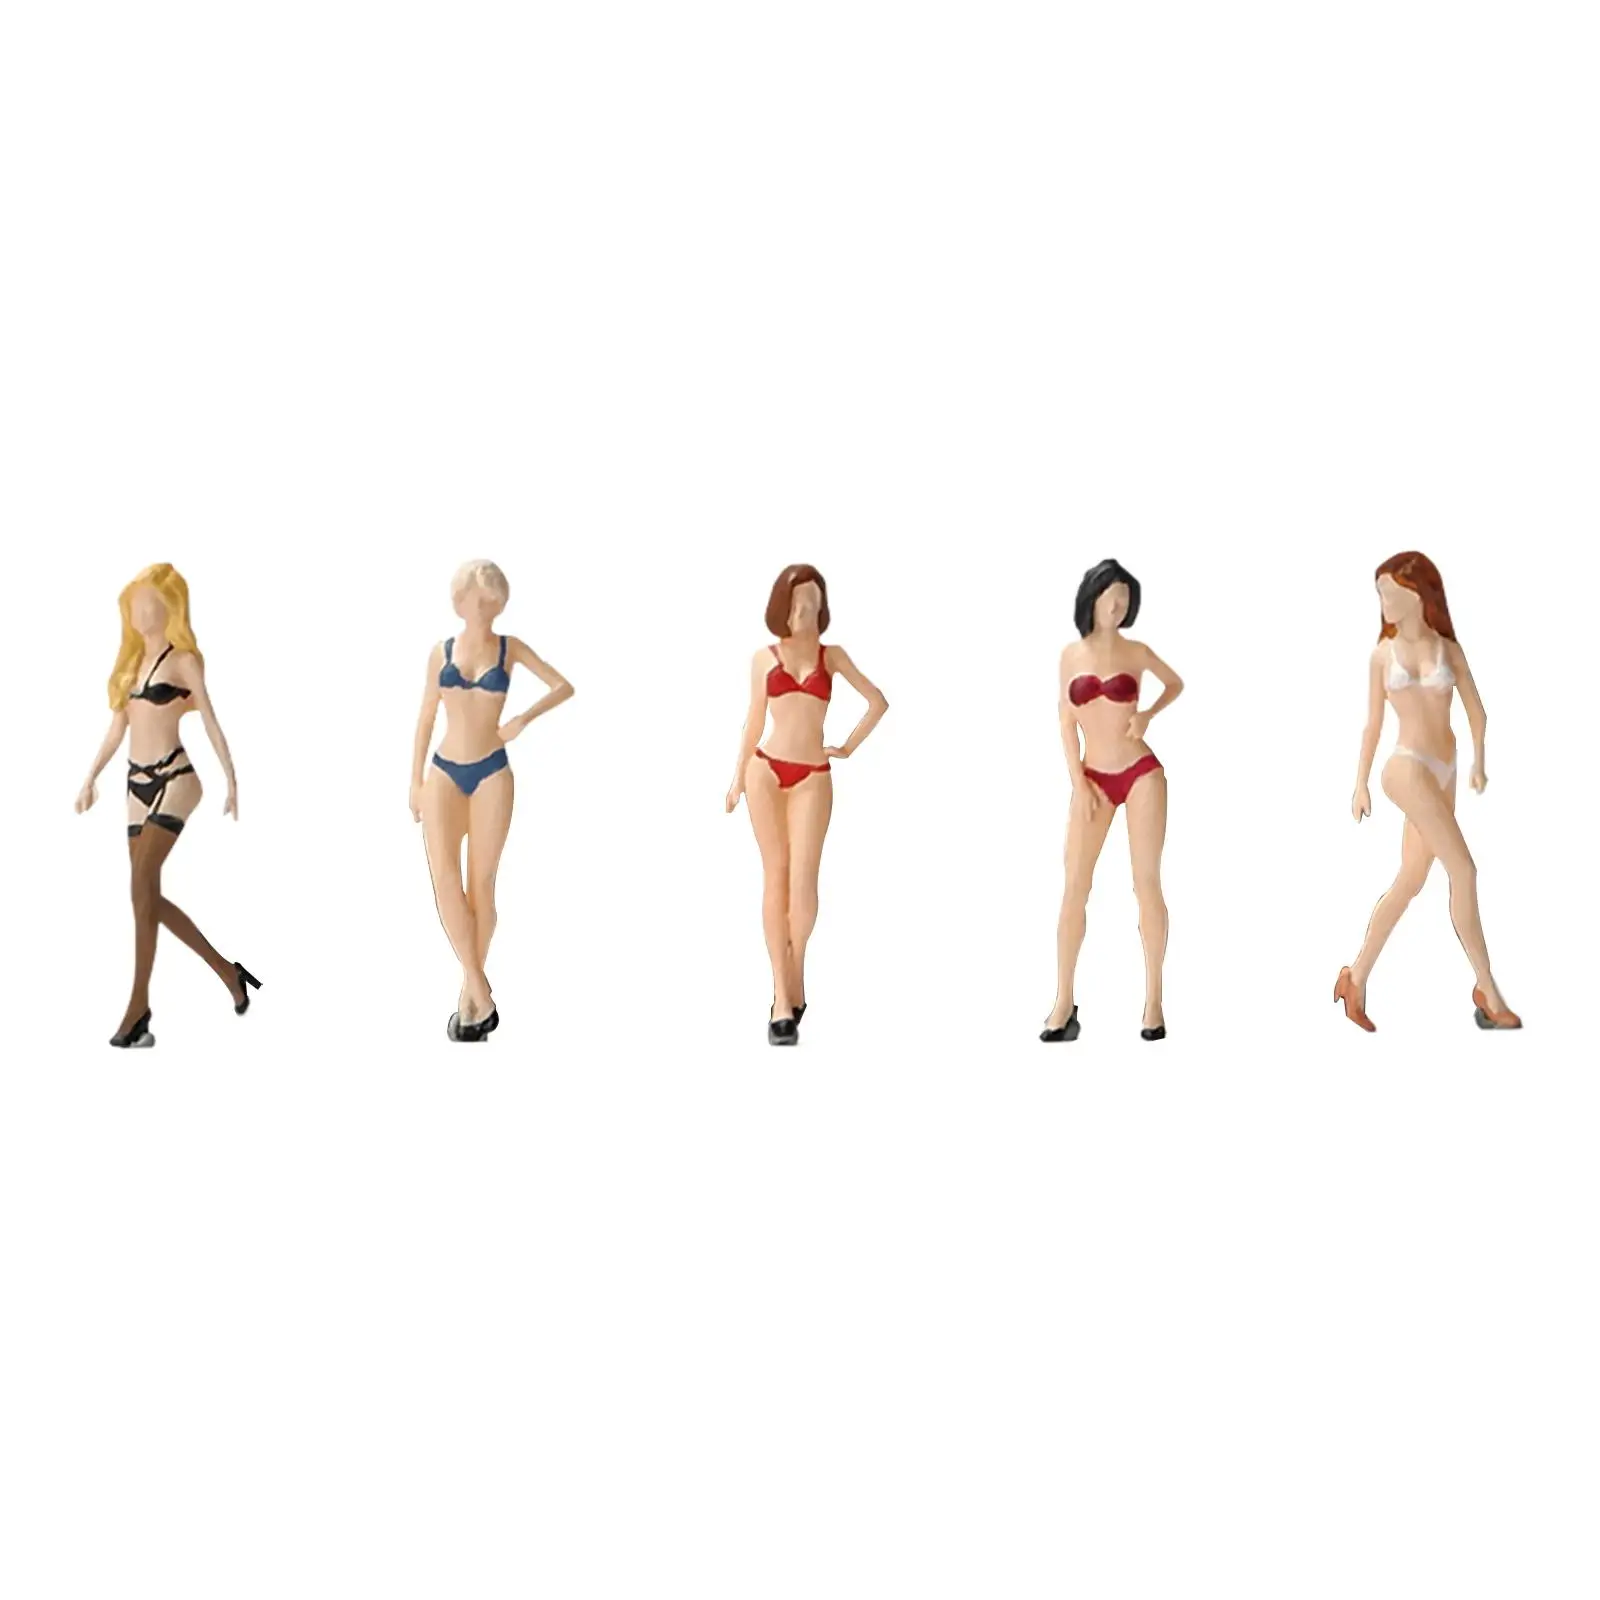 1/64 Scale Model People Figures Miniature People Model Tiny People 1/64 Female Models Figurine for Diorama Layout Decoration